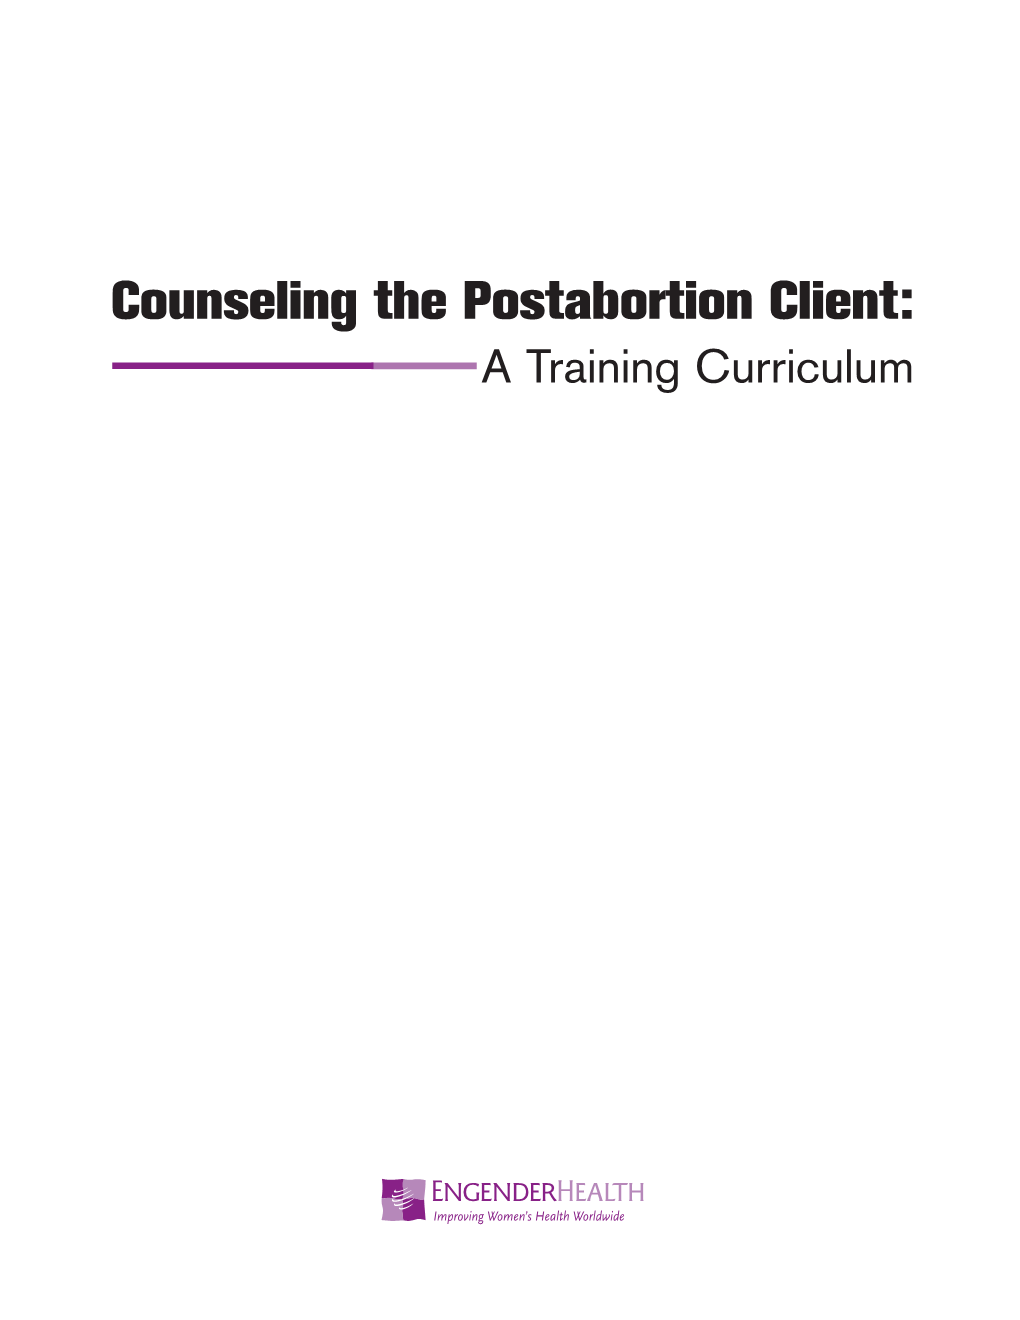 Counseling the Postabortion Client: a Training Curriculum